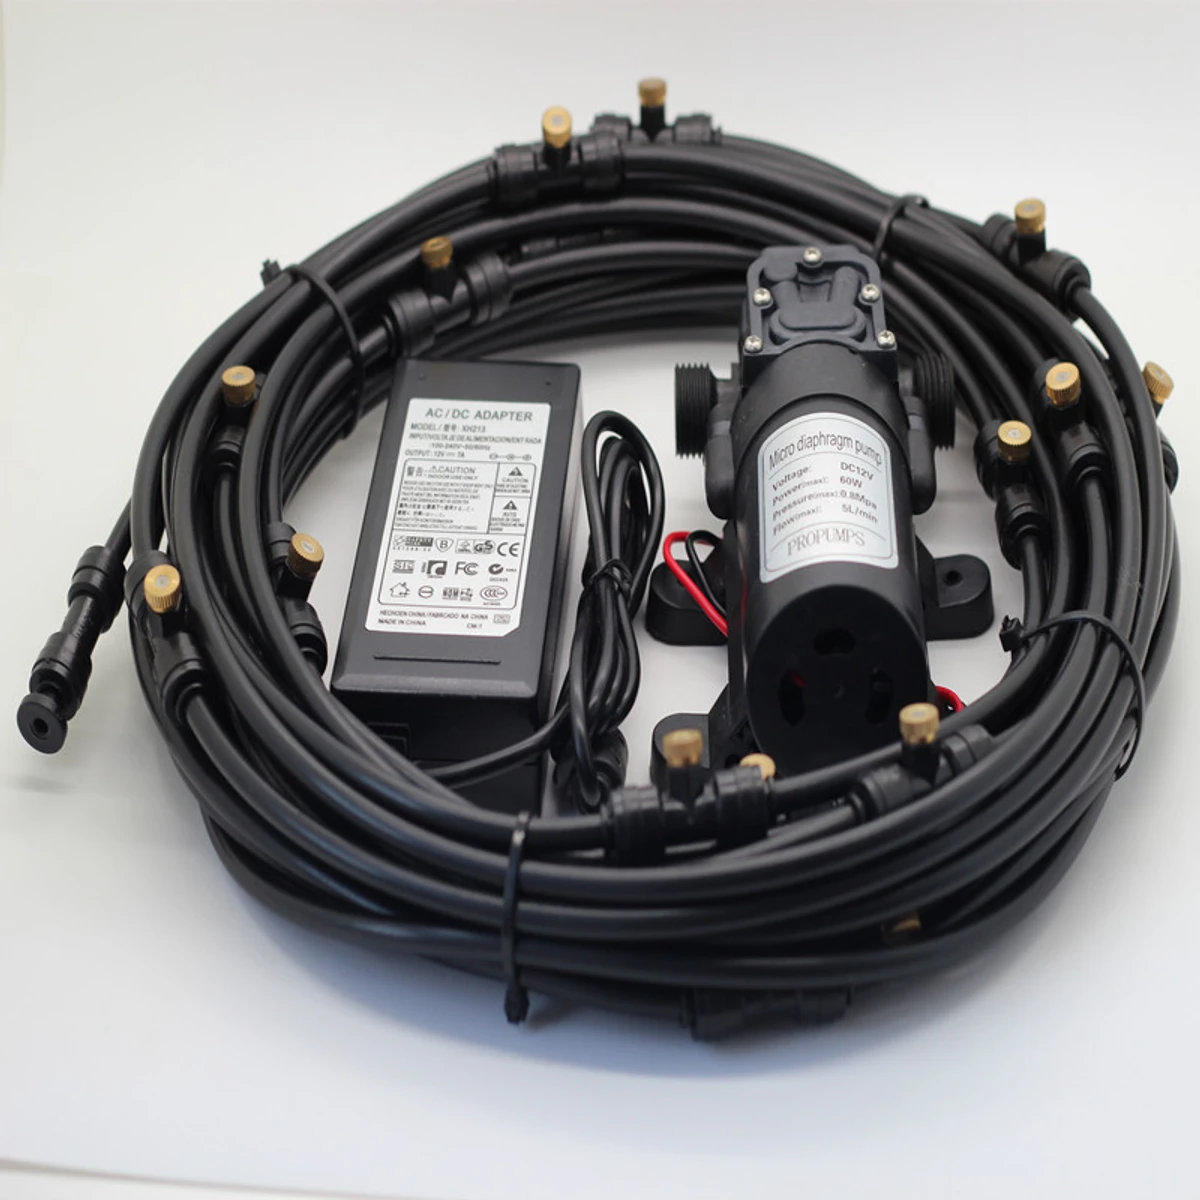 6-18m low pressure spray system plus 12v60w pump set comes with filter tips